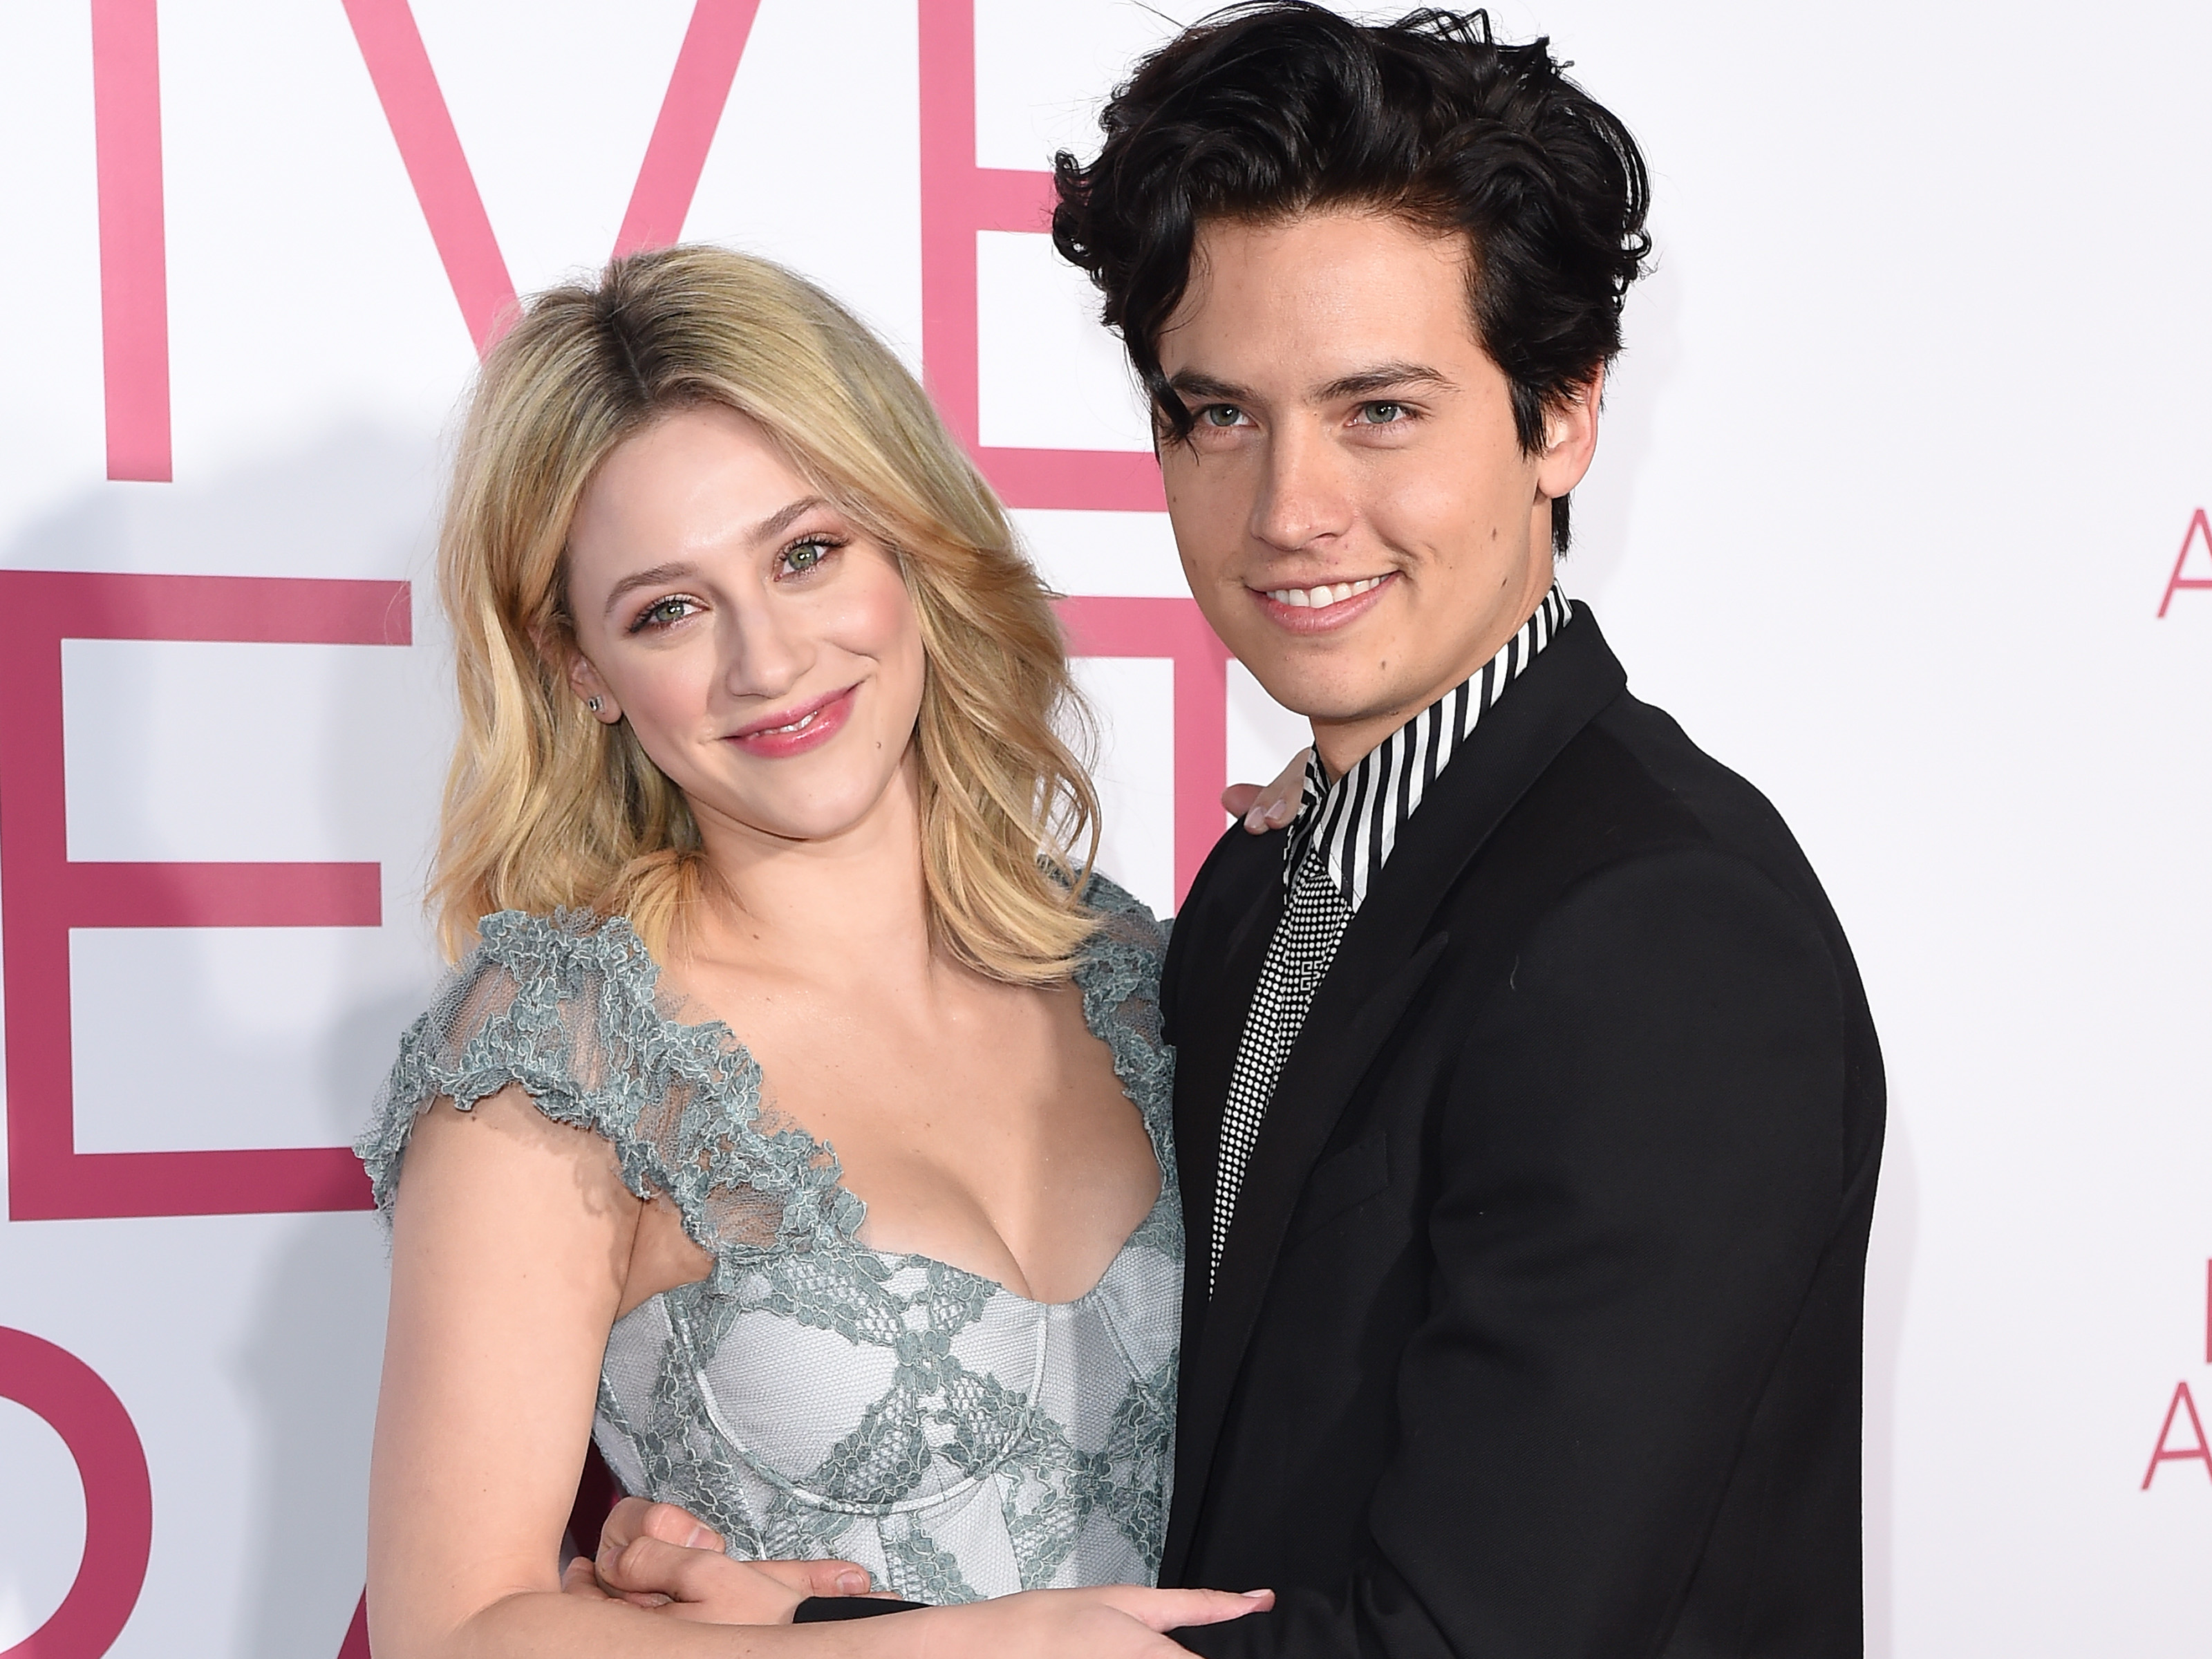 Cole Sprouse and Lili Reinhart have always tried to keep their